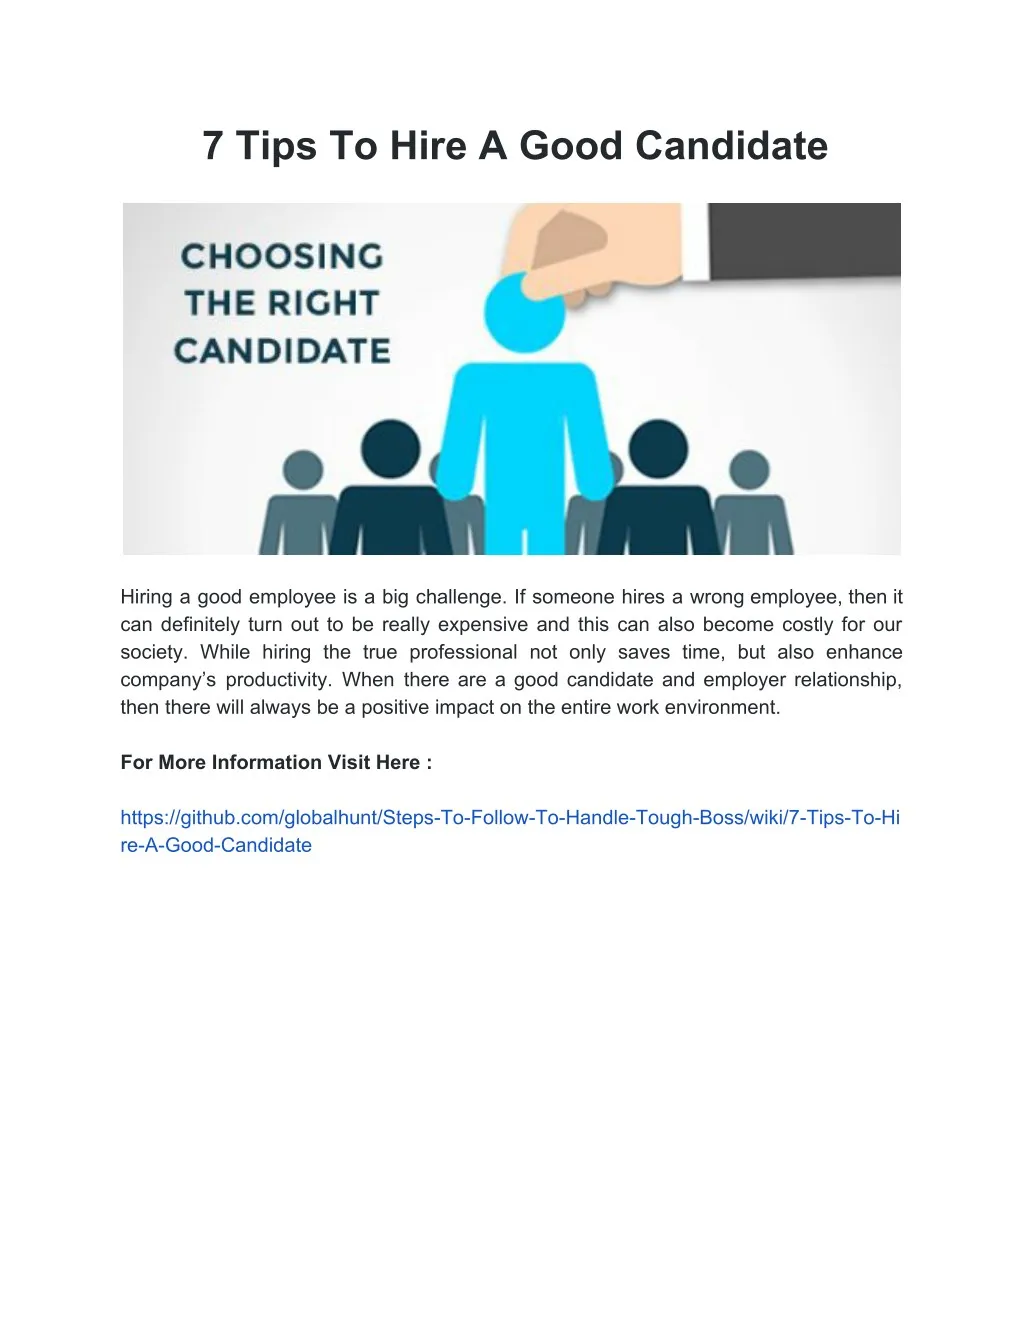 7 tips to hire a good candidate